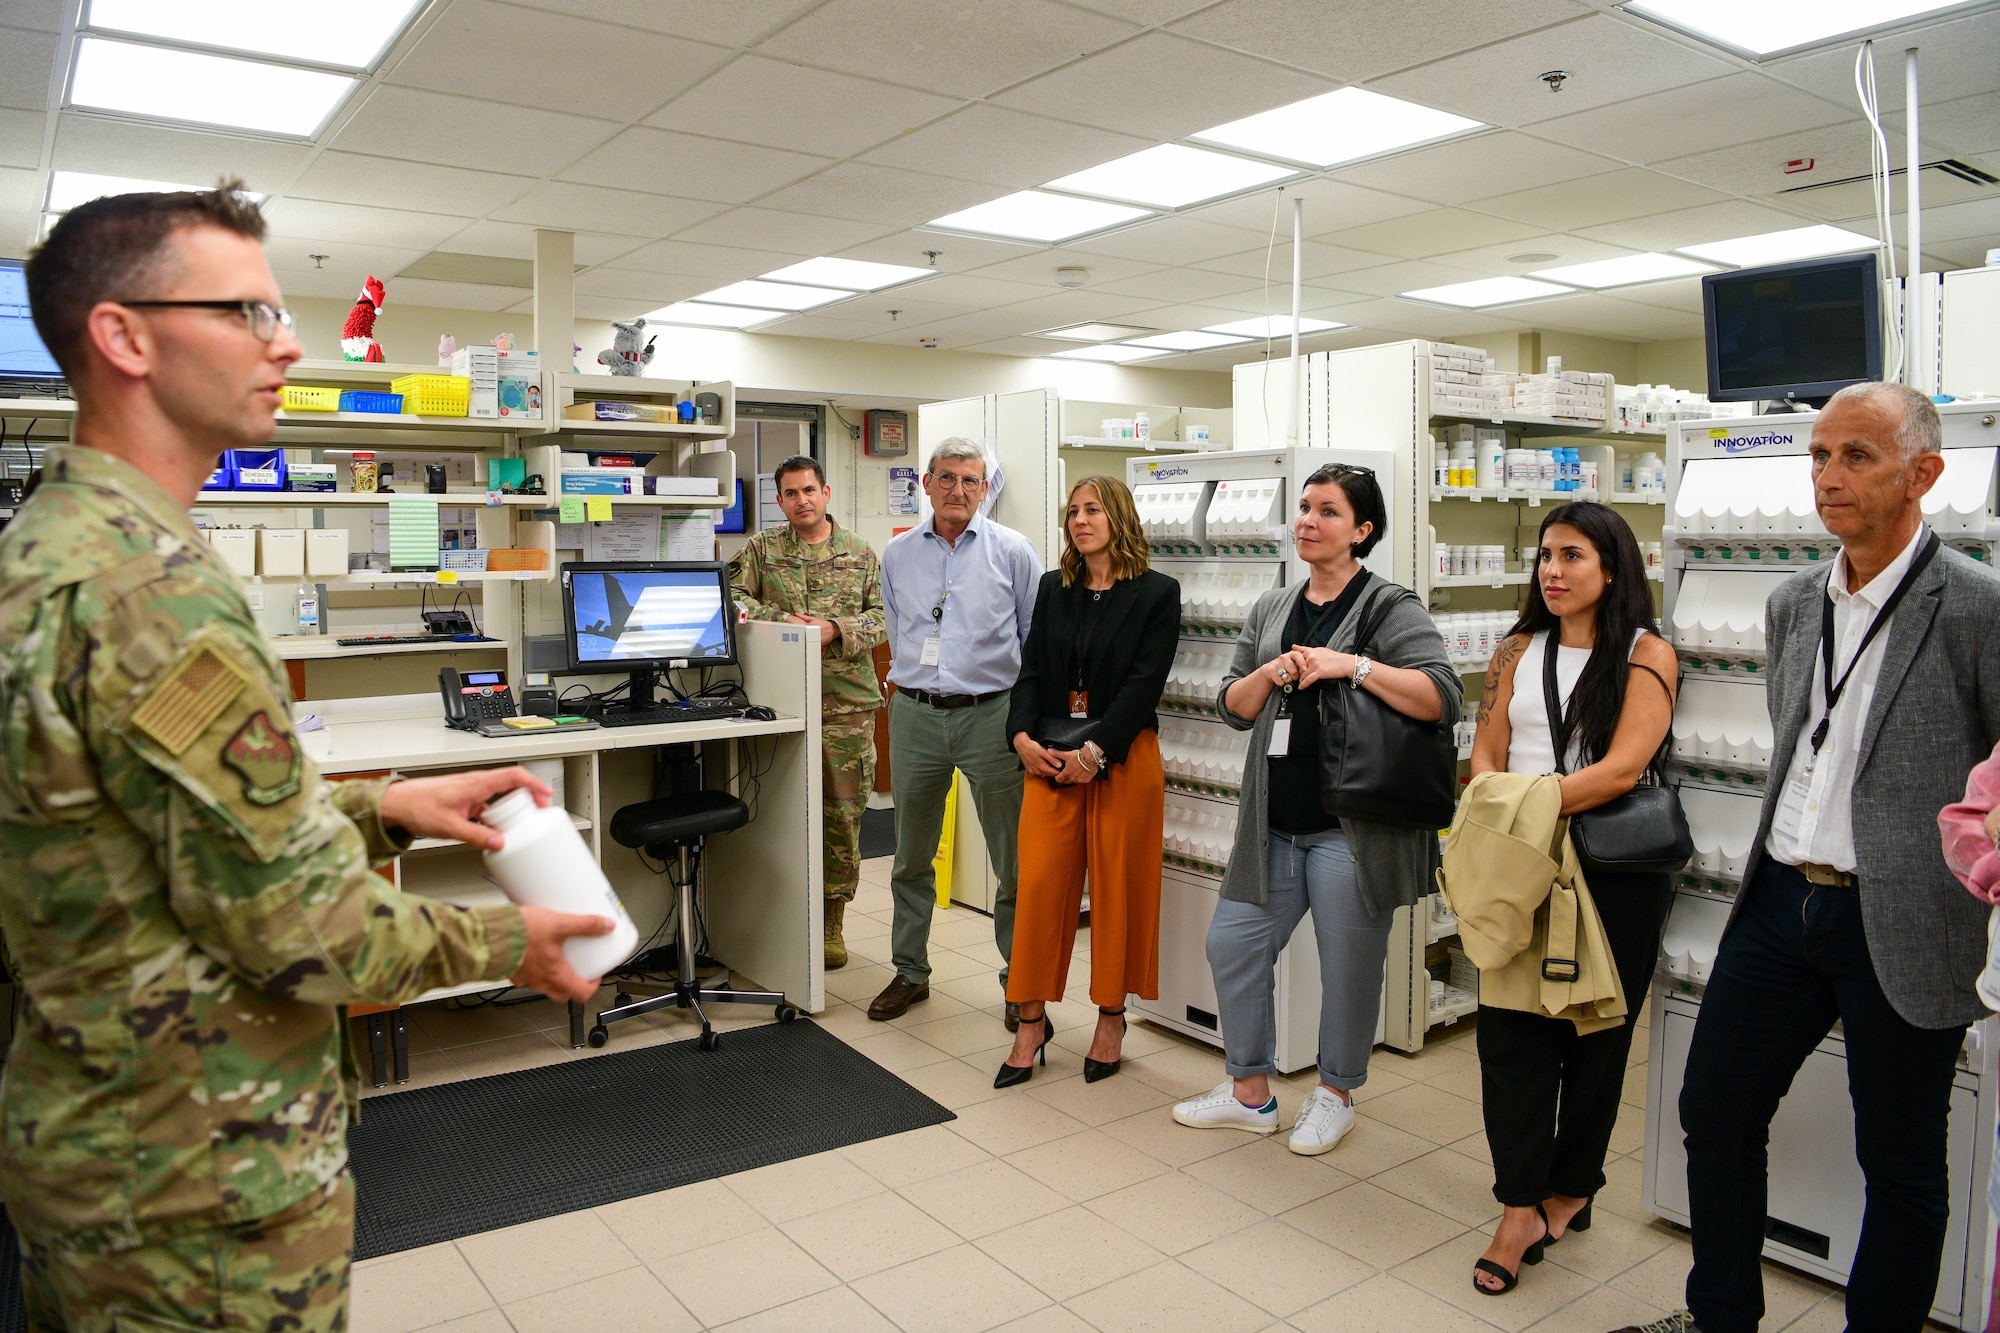 U.S. Air Force Capt. Benjamin Irmen, 31st Medical Group executive officer, left, briefs local Italian host nation providers on 31st MDG pharmacy operations during a 31st MDG Open House event at Aviano Air Base, Italy, June 9, 2022. During the event host nation partners toured different parts of the 31st MDG facilities and learned about the 31st MDG mission: to supply agile trusted care, sustain ready medics and provide a premier patient experience. (U.S. Air Force photo by Senior Airman Brooke Moeder)